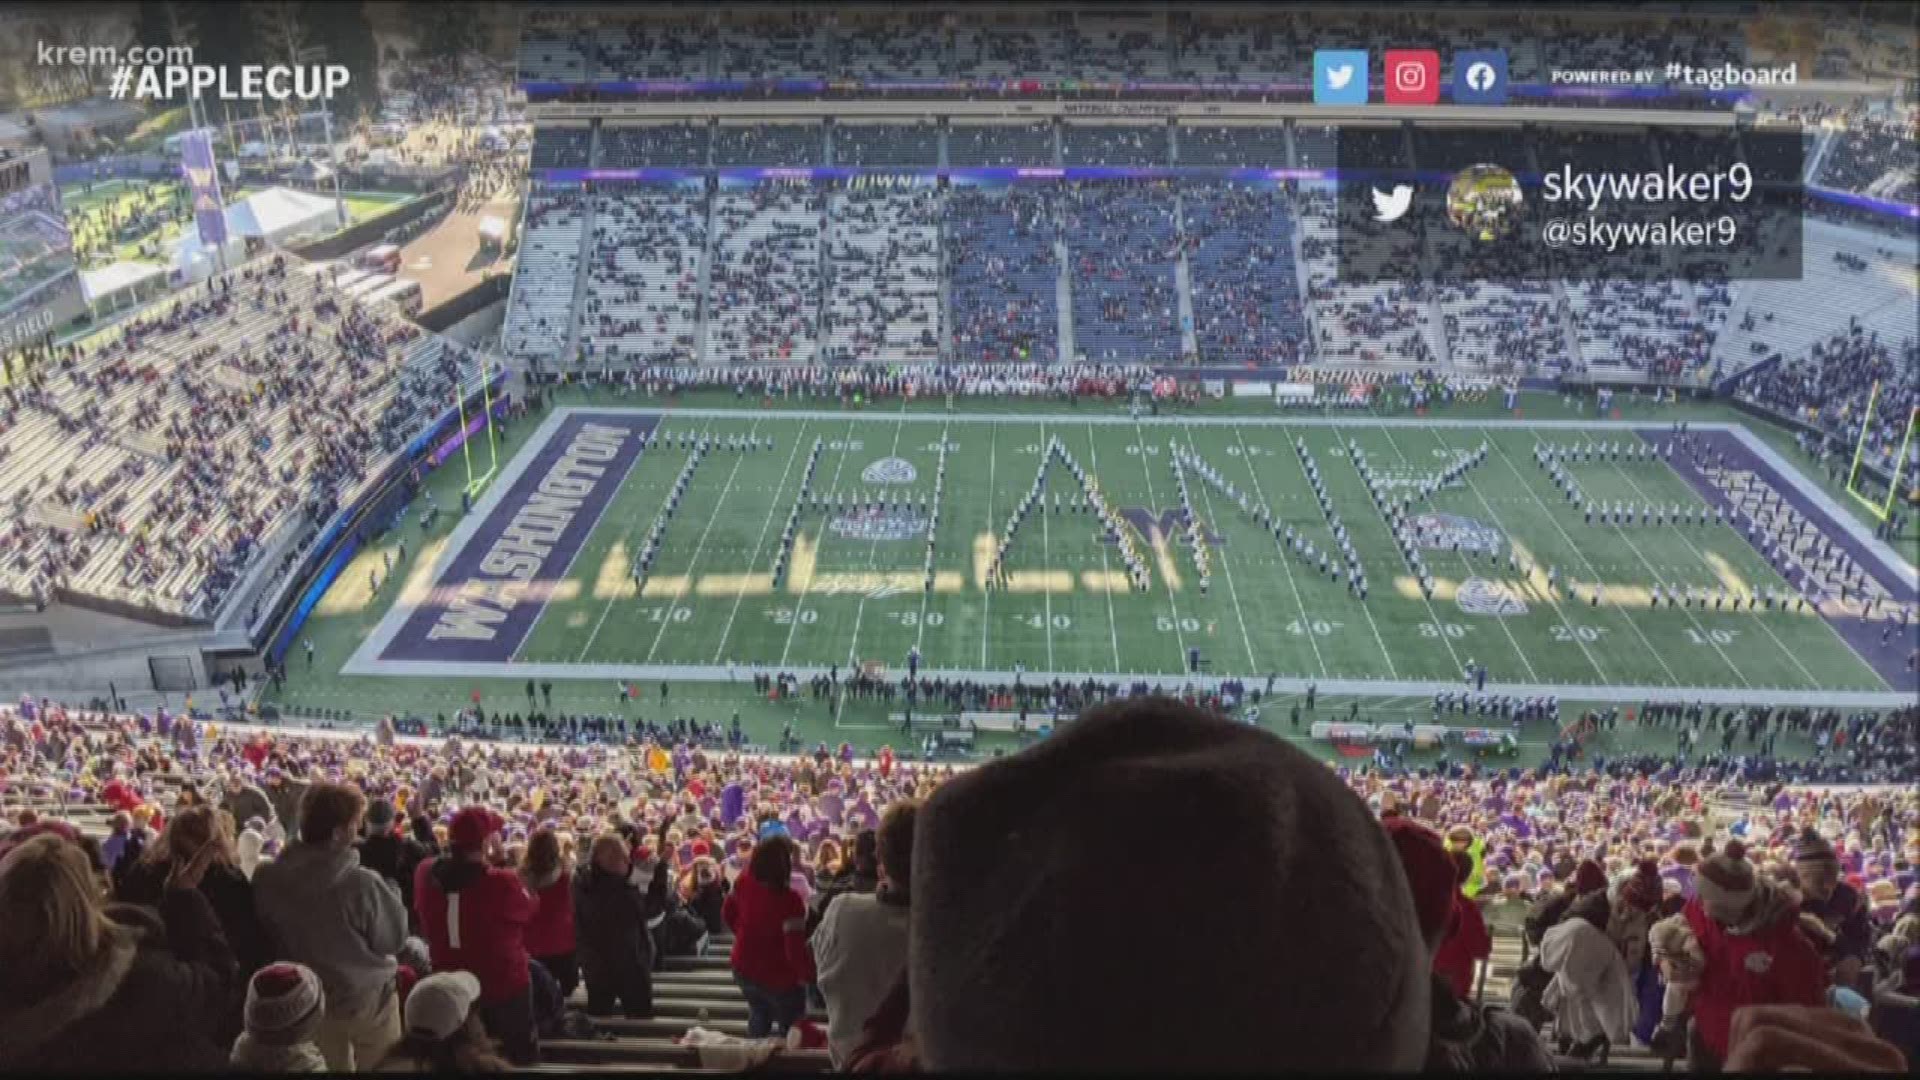 The UW Husky Marching Band played the WSU fight song ahead of the Apple Cup. The move was in response to the WSU Marching Band doing the same for UW last year.